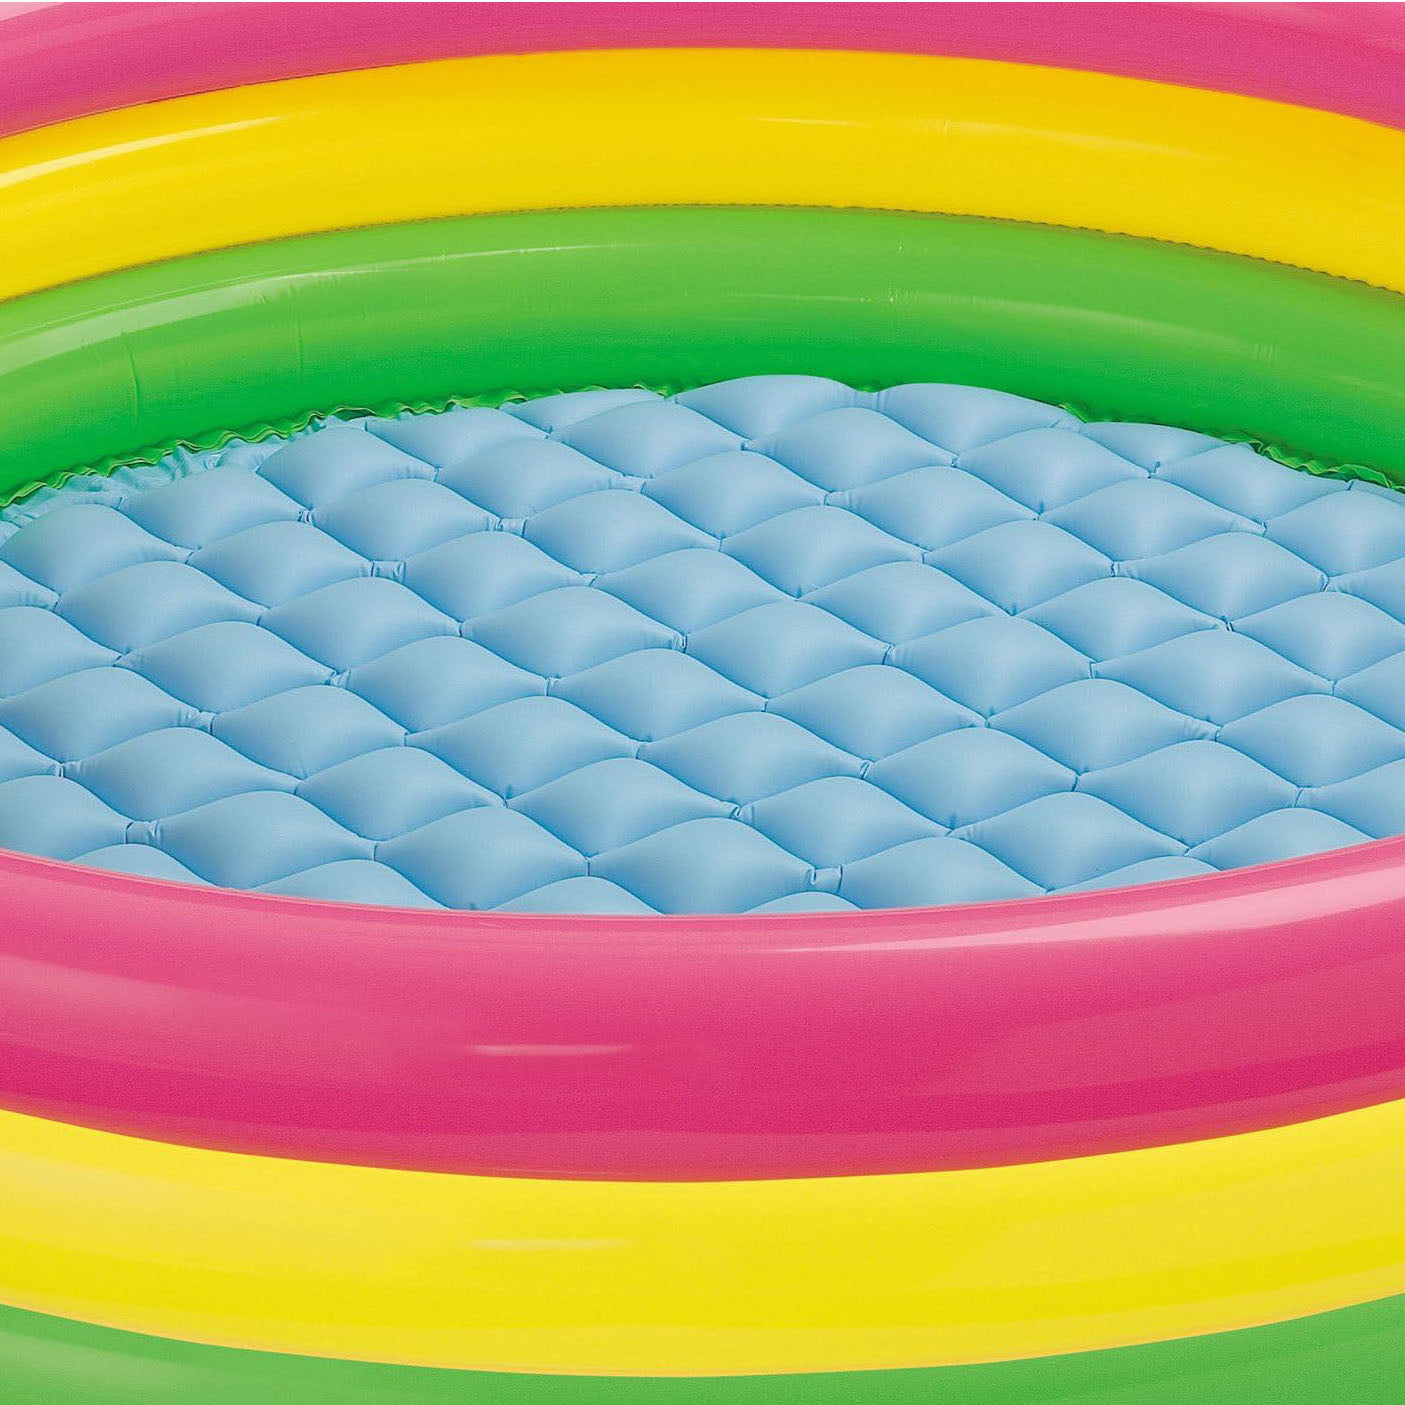 Intex Sunset Glow Inflatable Pool, 58 x 13 Inches, Tri Colour, 147 x 33 cm